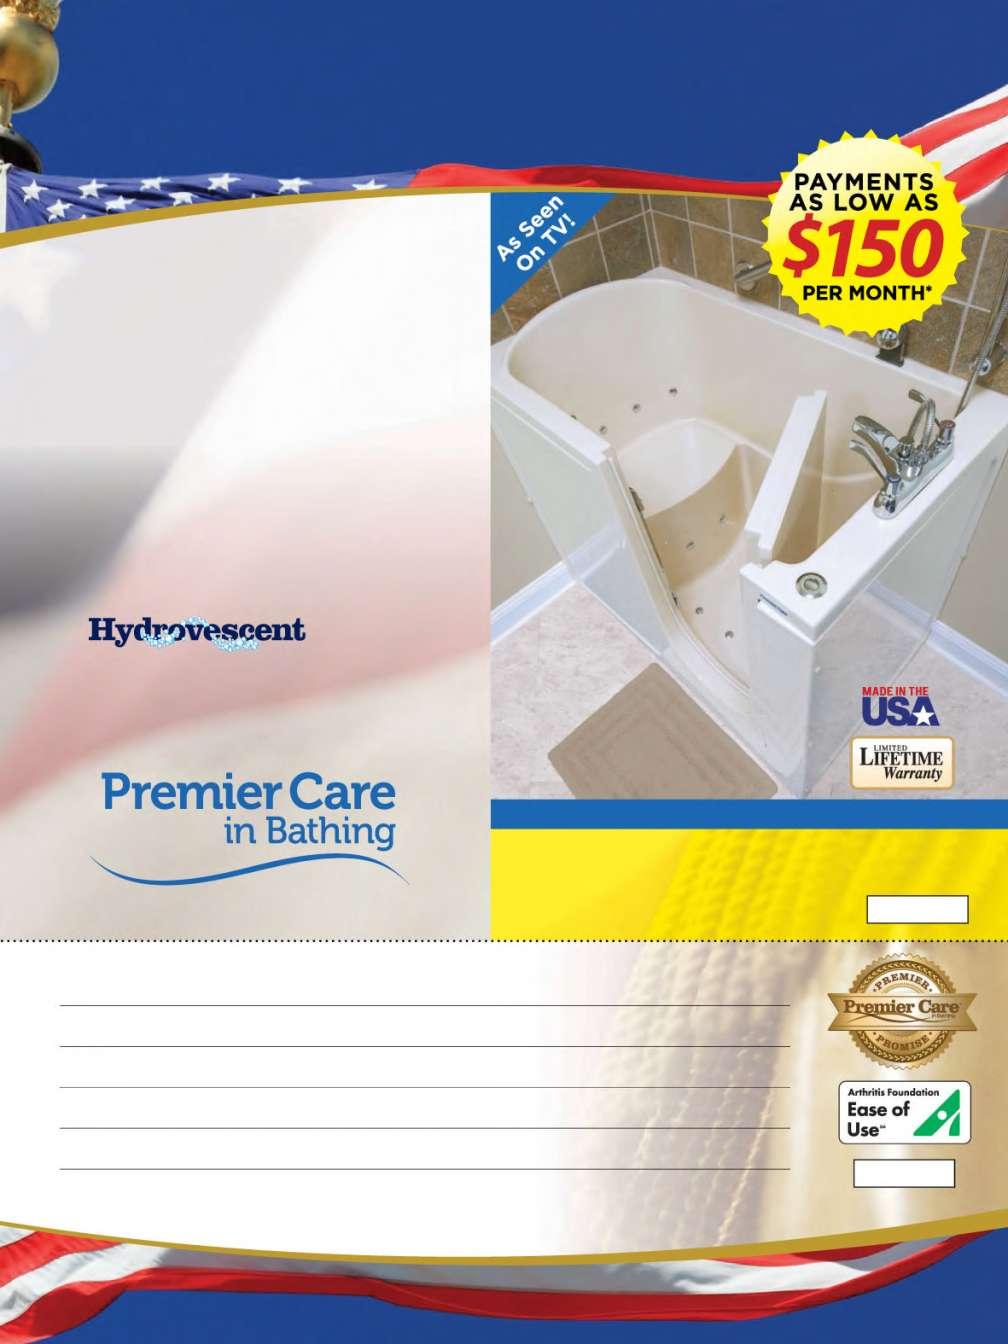 Attention Save Now On A Walk-In Bath Or Easy Access Shower Bathe Safely and Worry-Free with a Premier Care in Bathing Walk-In Bath. Independence and security are only a phone call away.